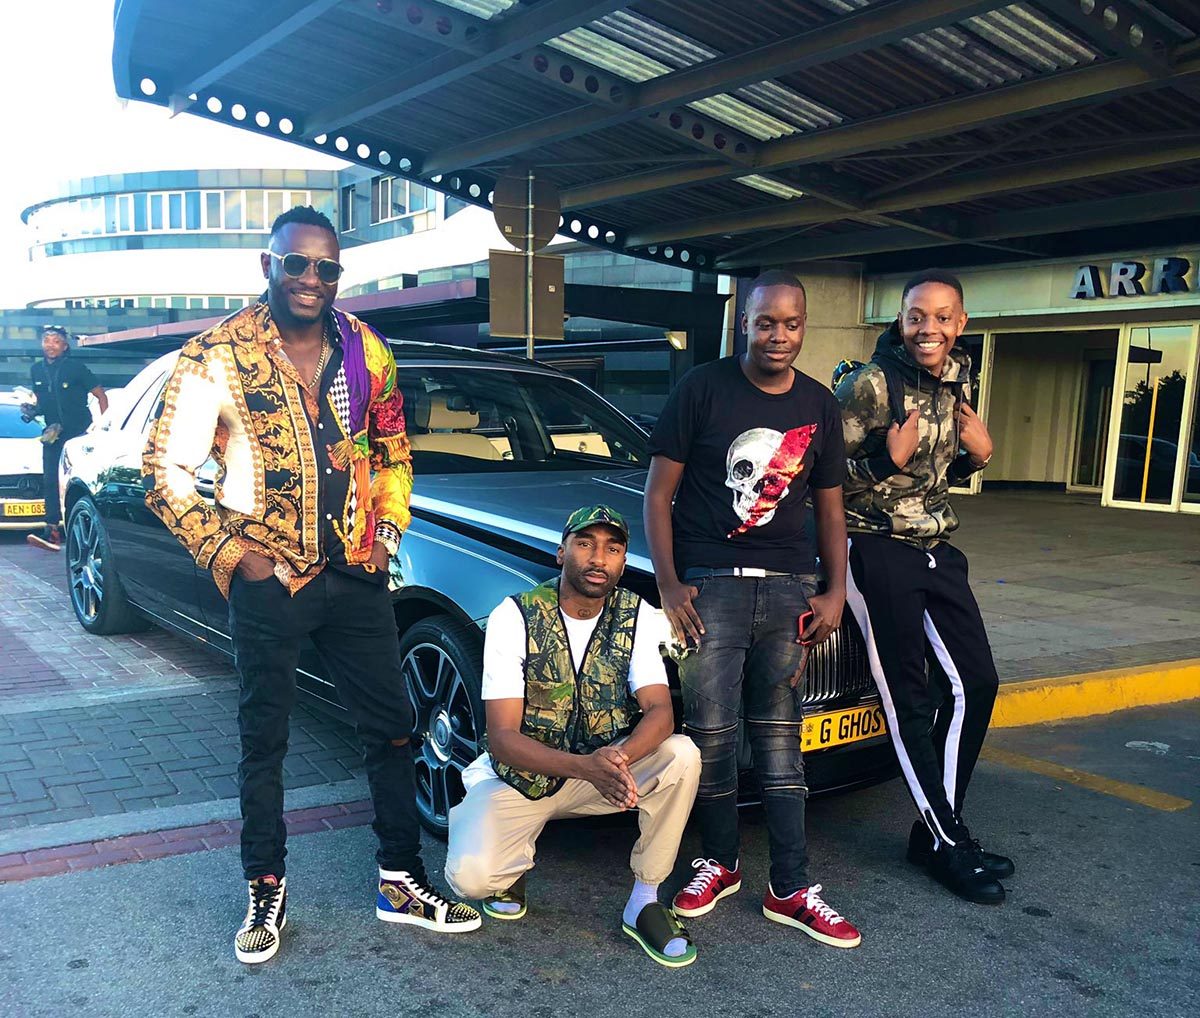 PICS: Riky Rick Once Risked Jail In Zimbabwe With Former President Mugabe’s Son Chatunga